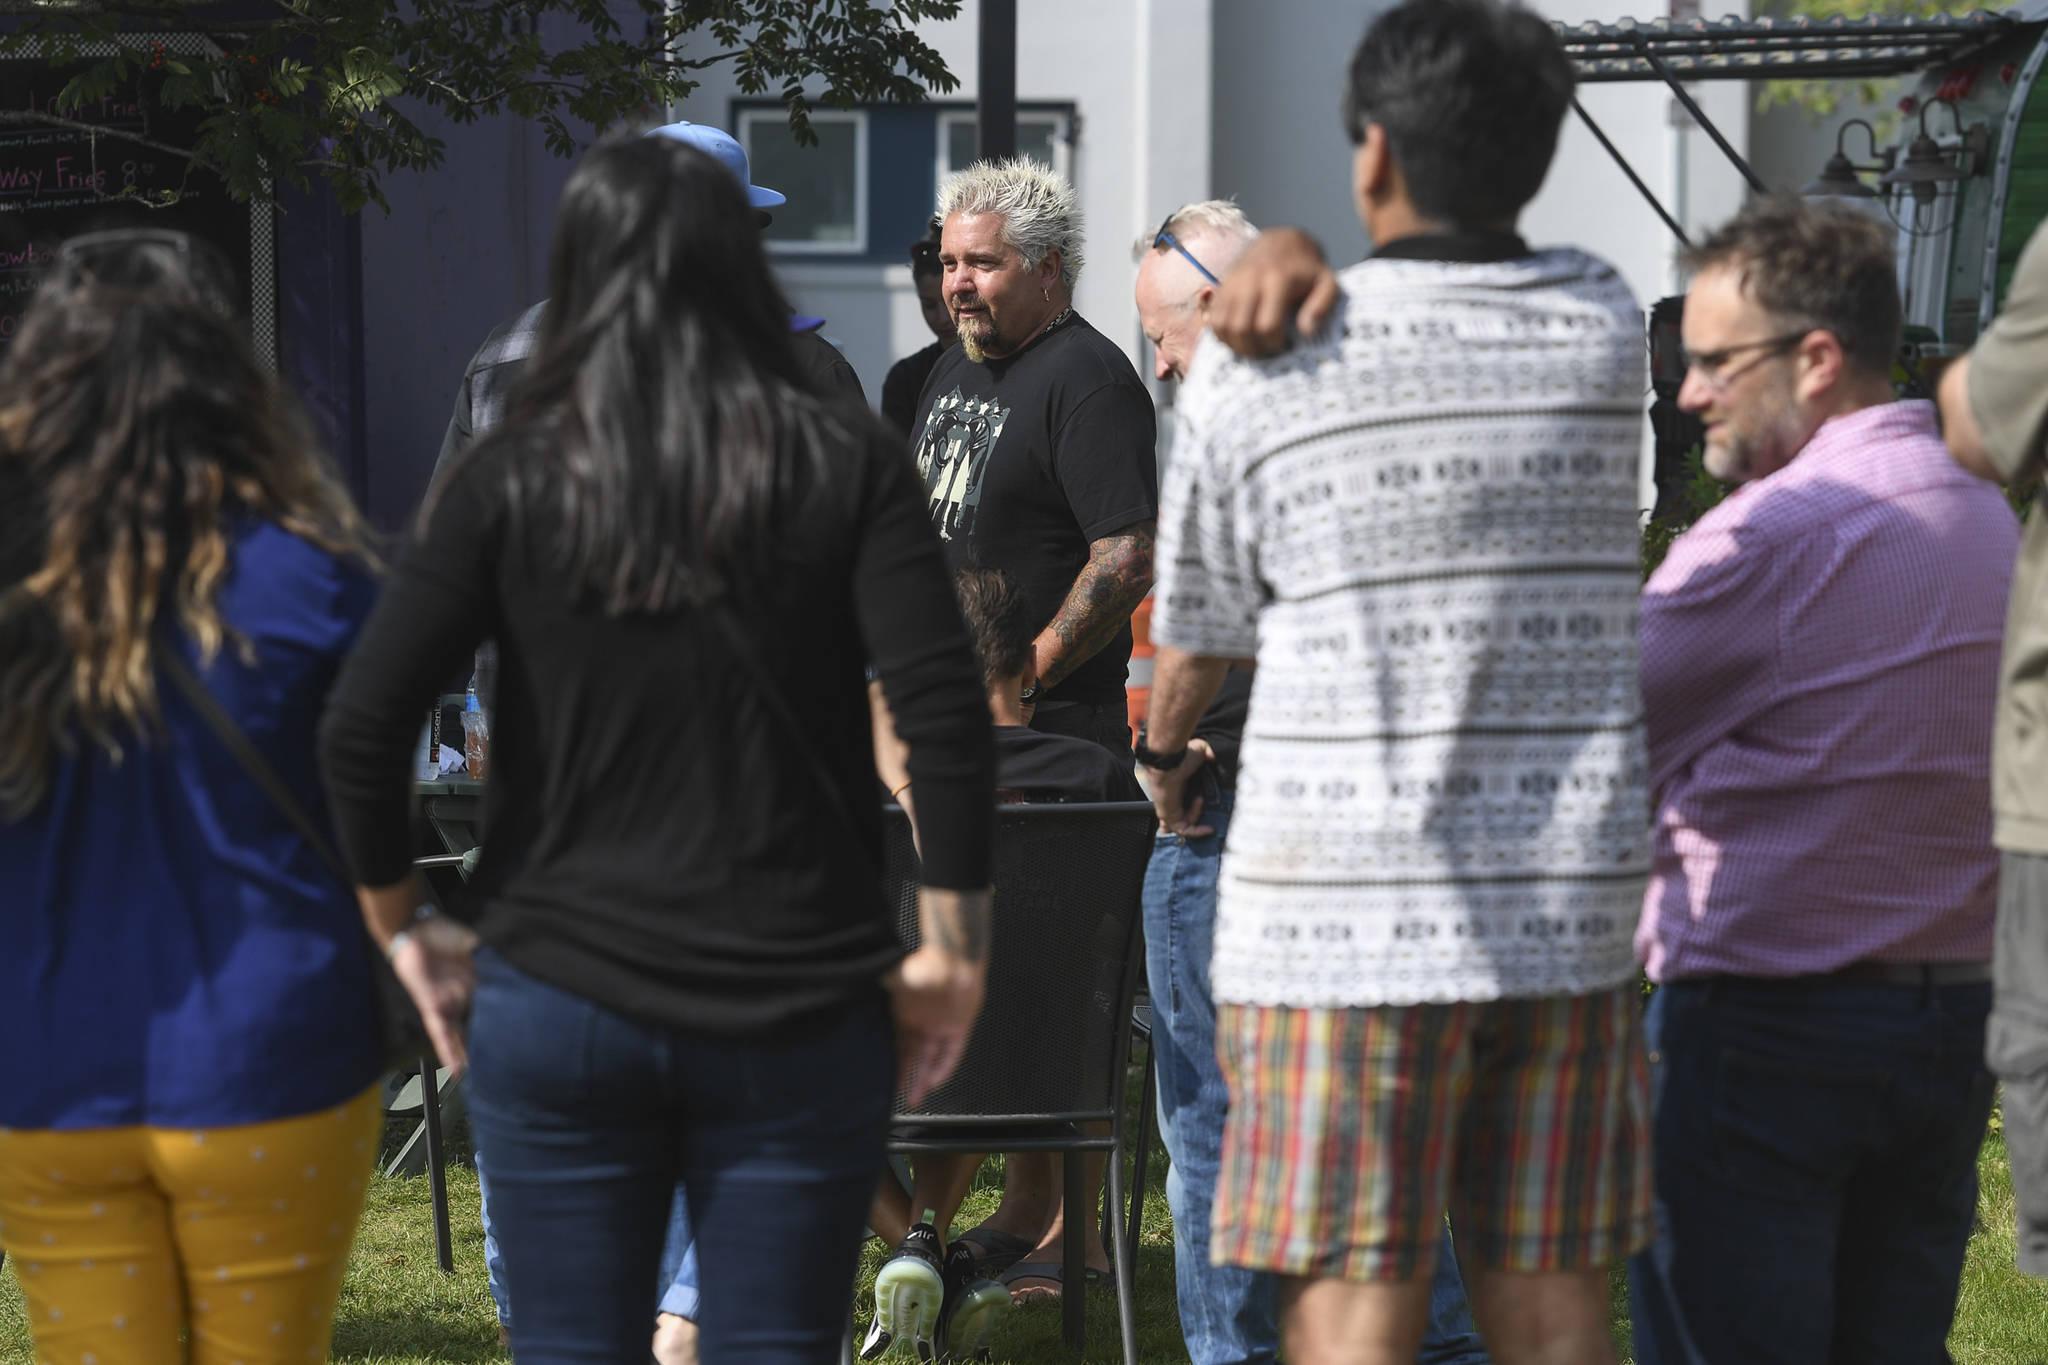 Guy Fieri, host of Diners, Drive-Ins and Dives, in front of the Juneau Arts & Culture Center on Tuesday, Aug. 13, 2019. Fieri has been seen filming at Pucker Wilson’s, Bun Daddy, Forno Rosso Pizzeria, Zerelda’s Bistro and In Bocca Al Lupo. (Michael Penn | Juneau Empire)